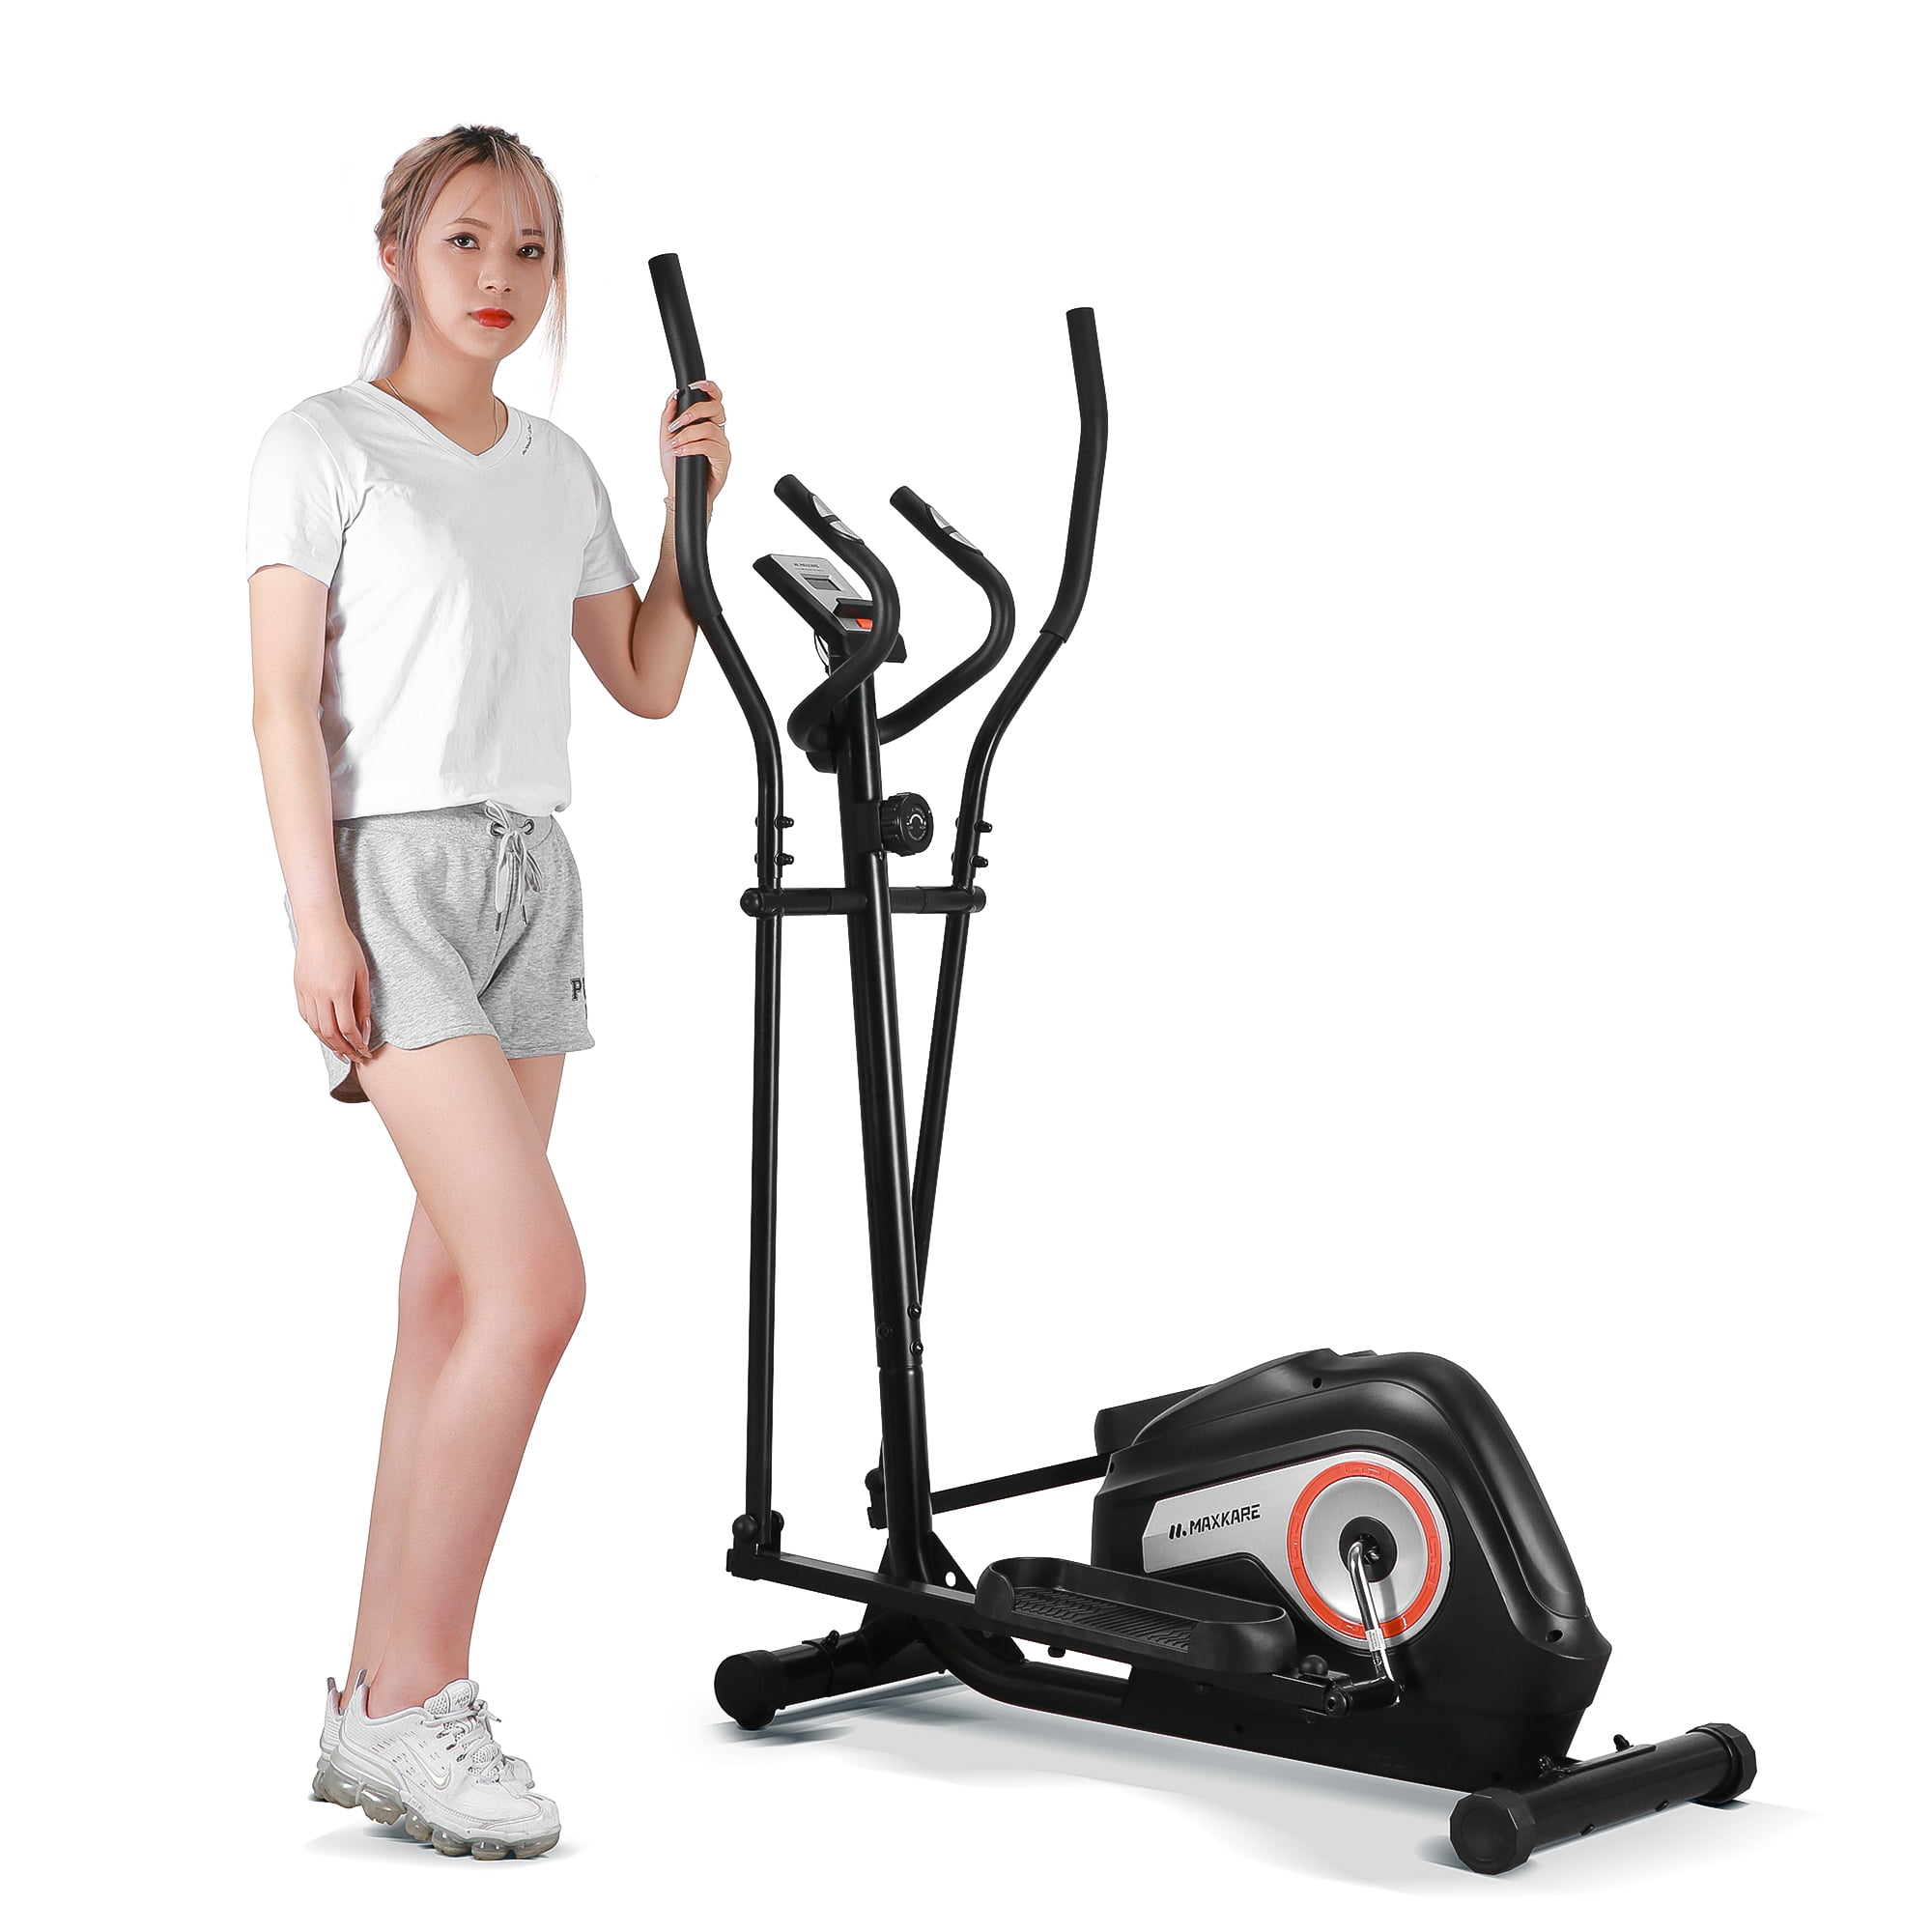 Details about   ANCHEER Magnetic Elliptical Exercise Fitness Training Machine Cardio Workout Red 